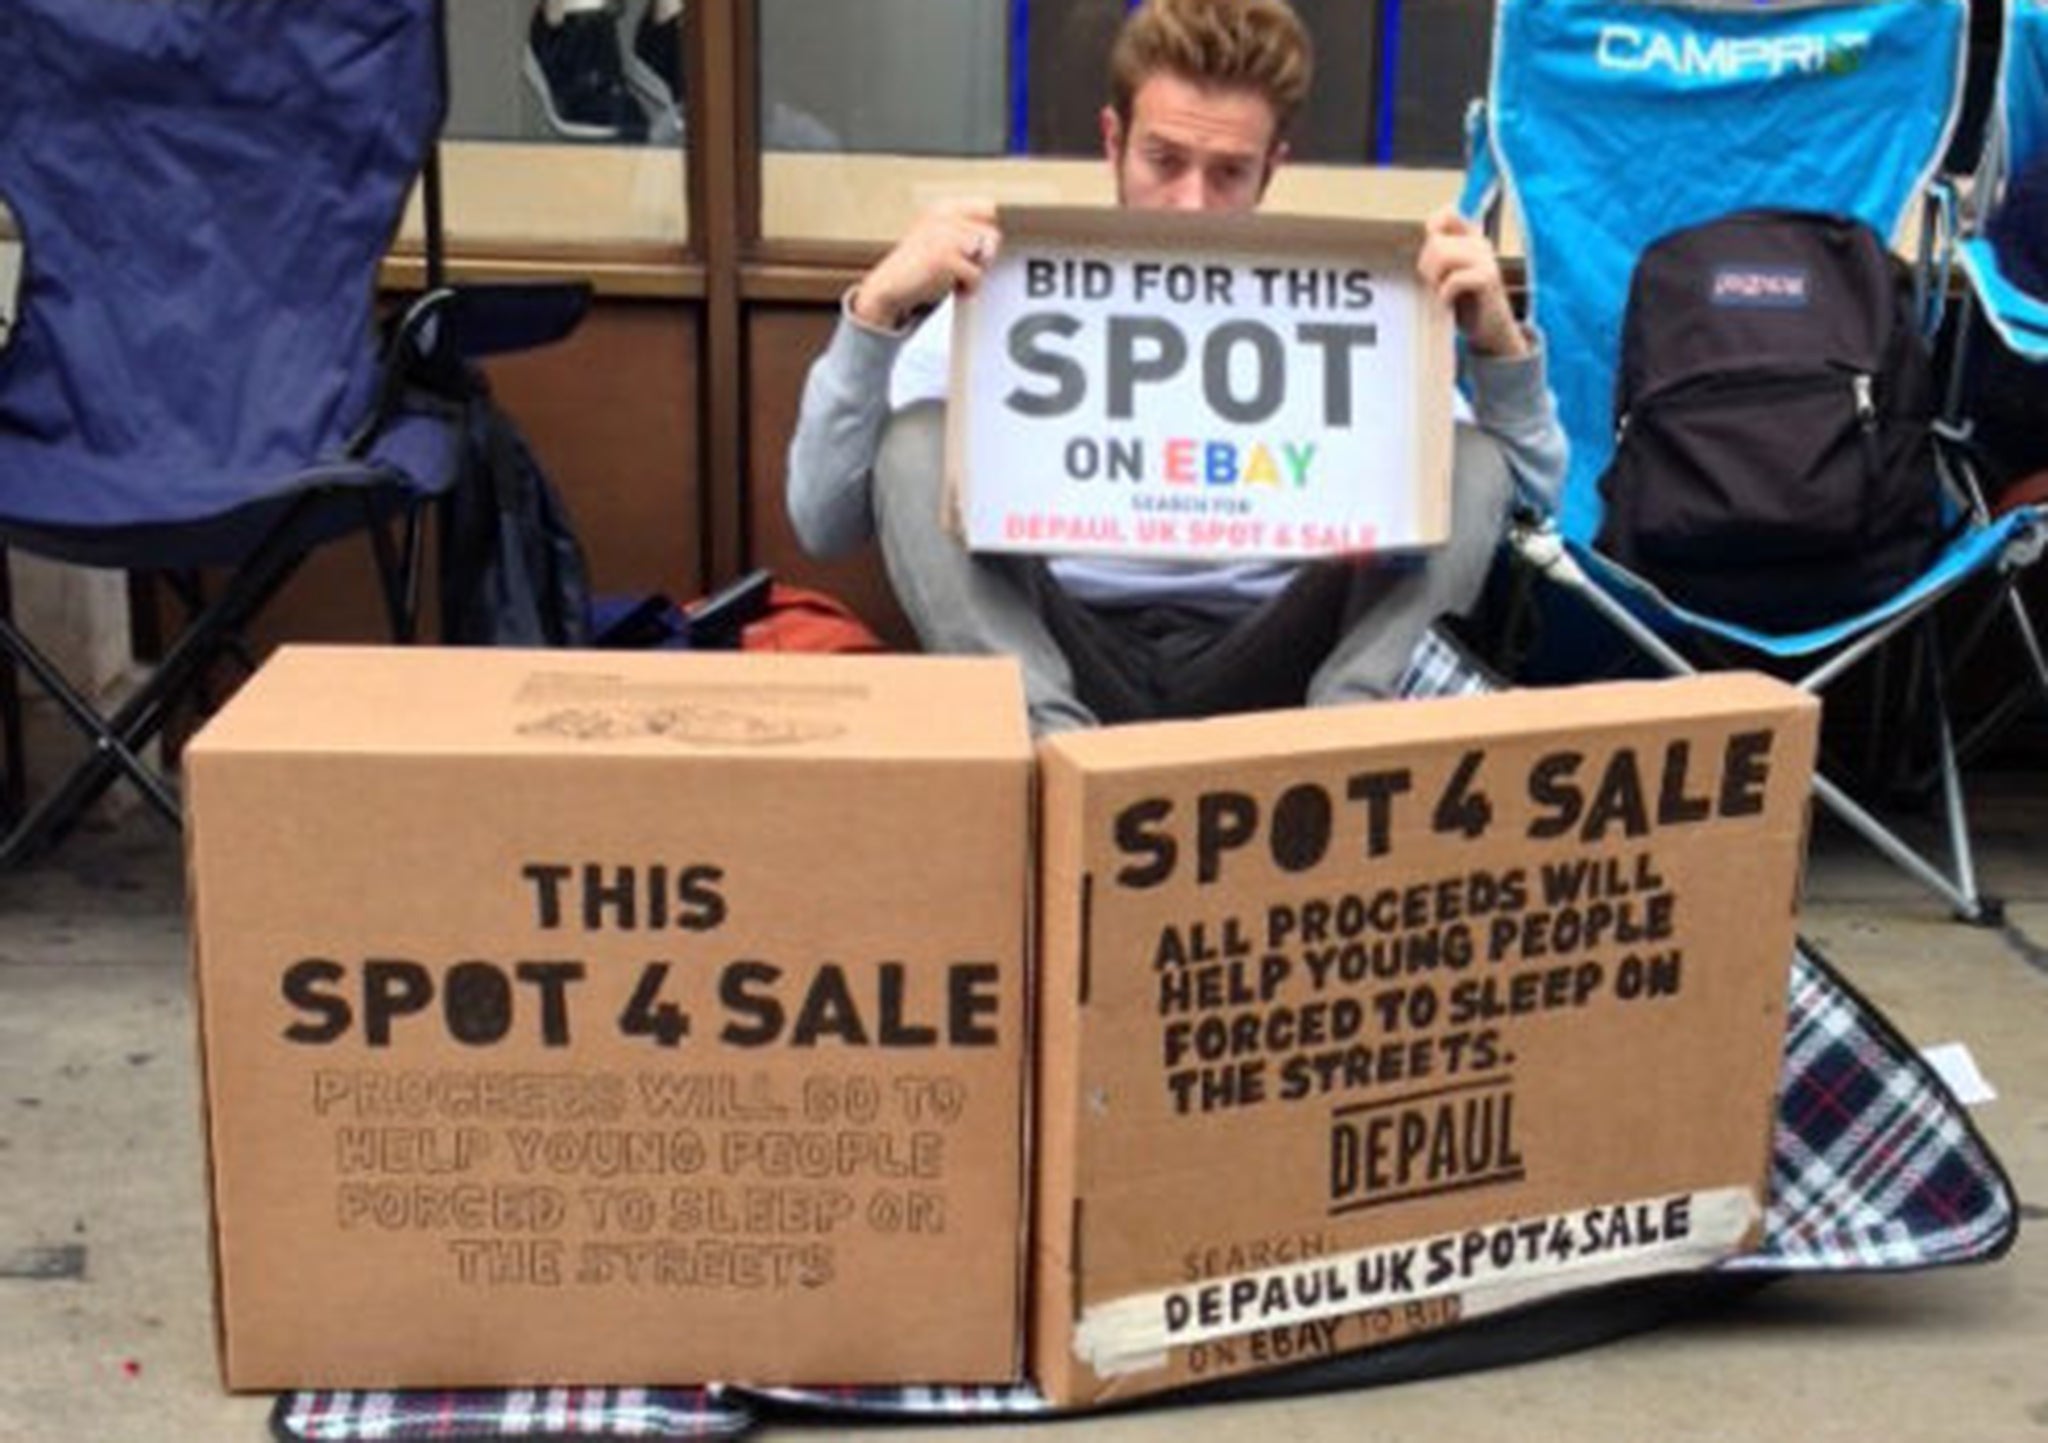 Homelessness charity Depaul is camping outside the Apple store to sell its spot in the queue